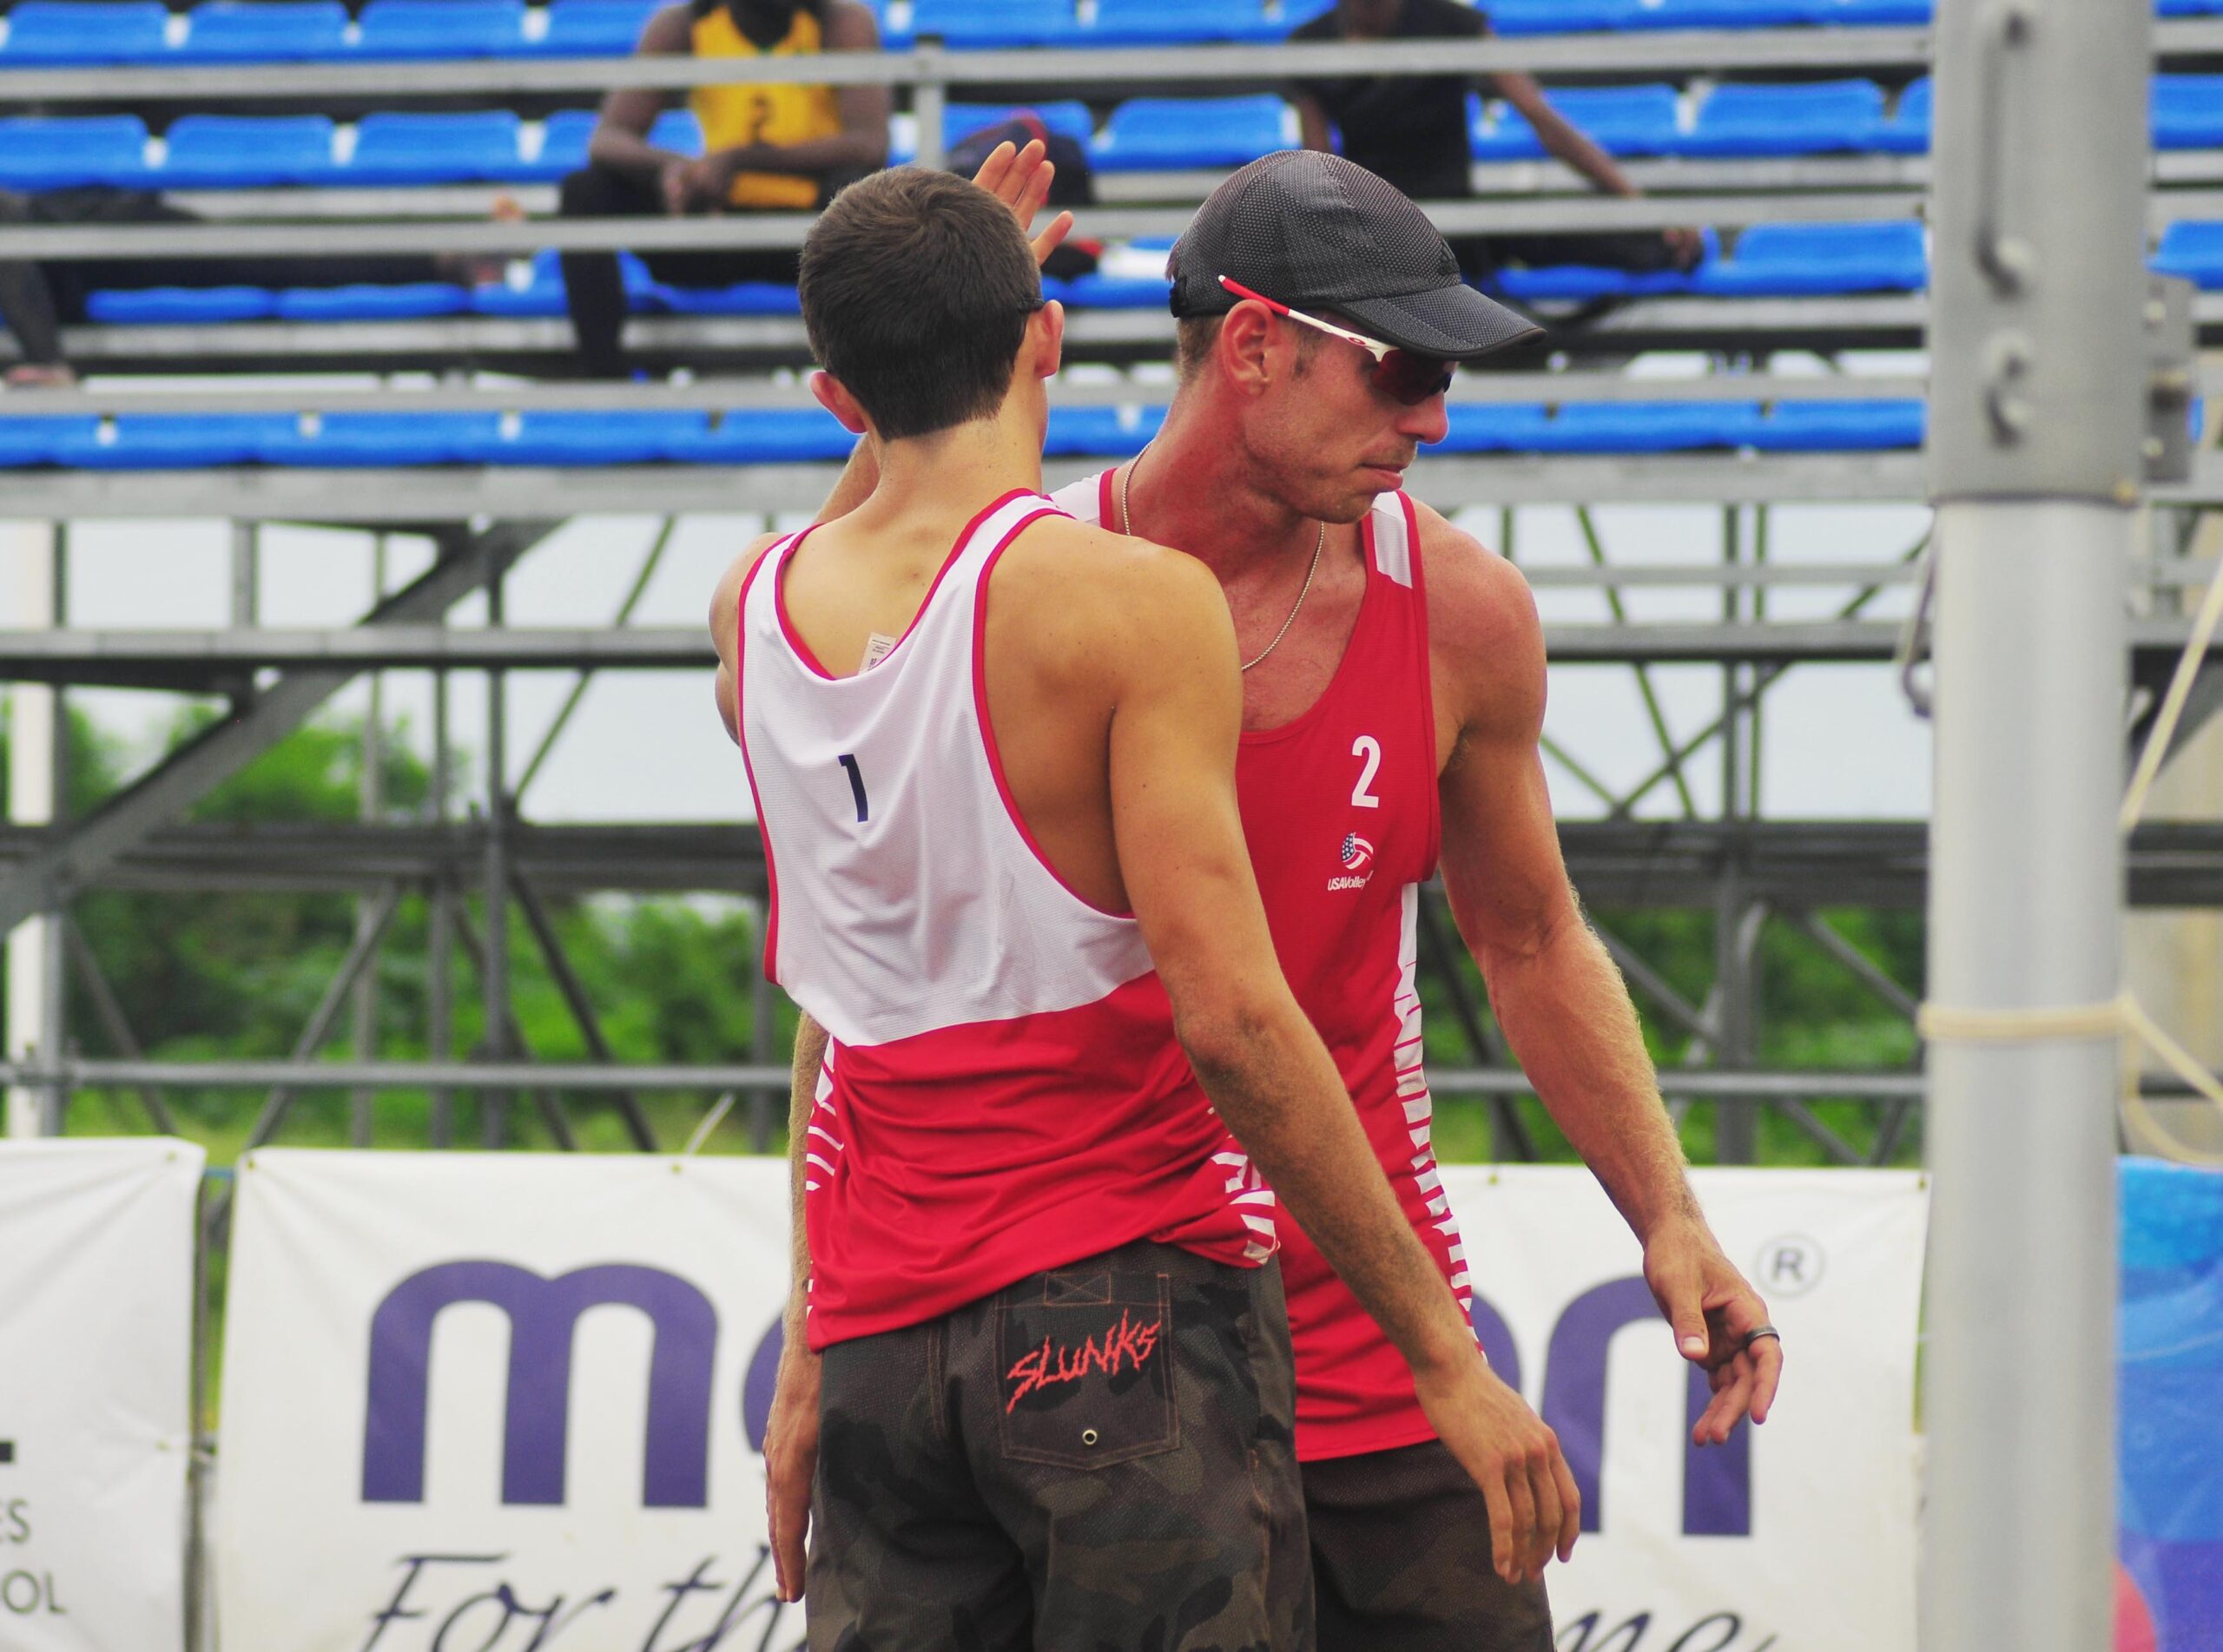 Brewster and Friend going for second gold at NORCECA Tour